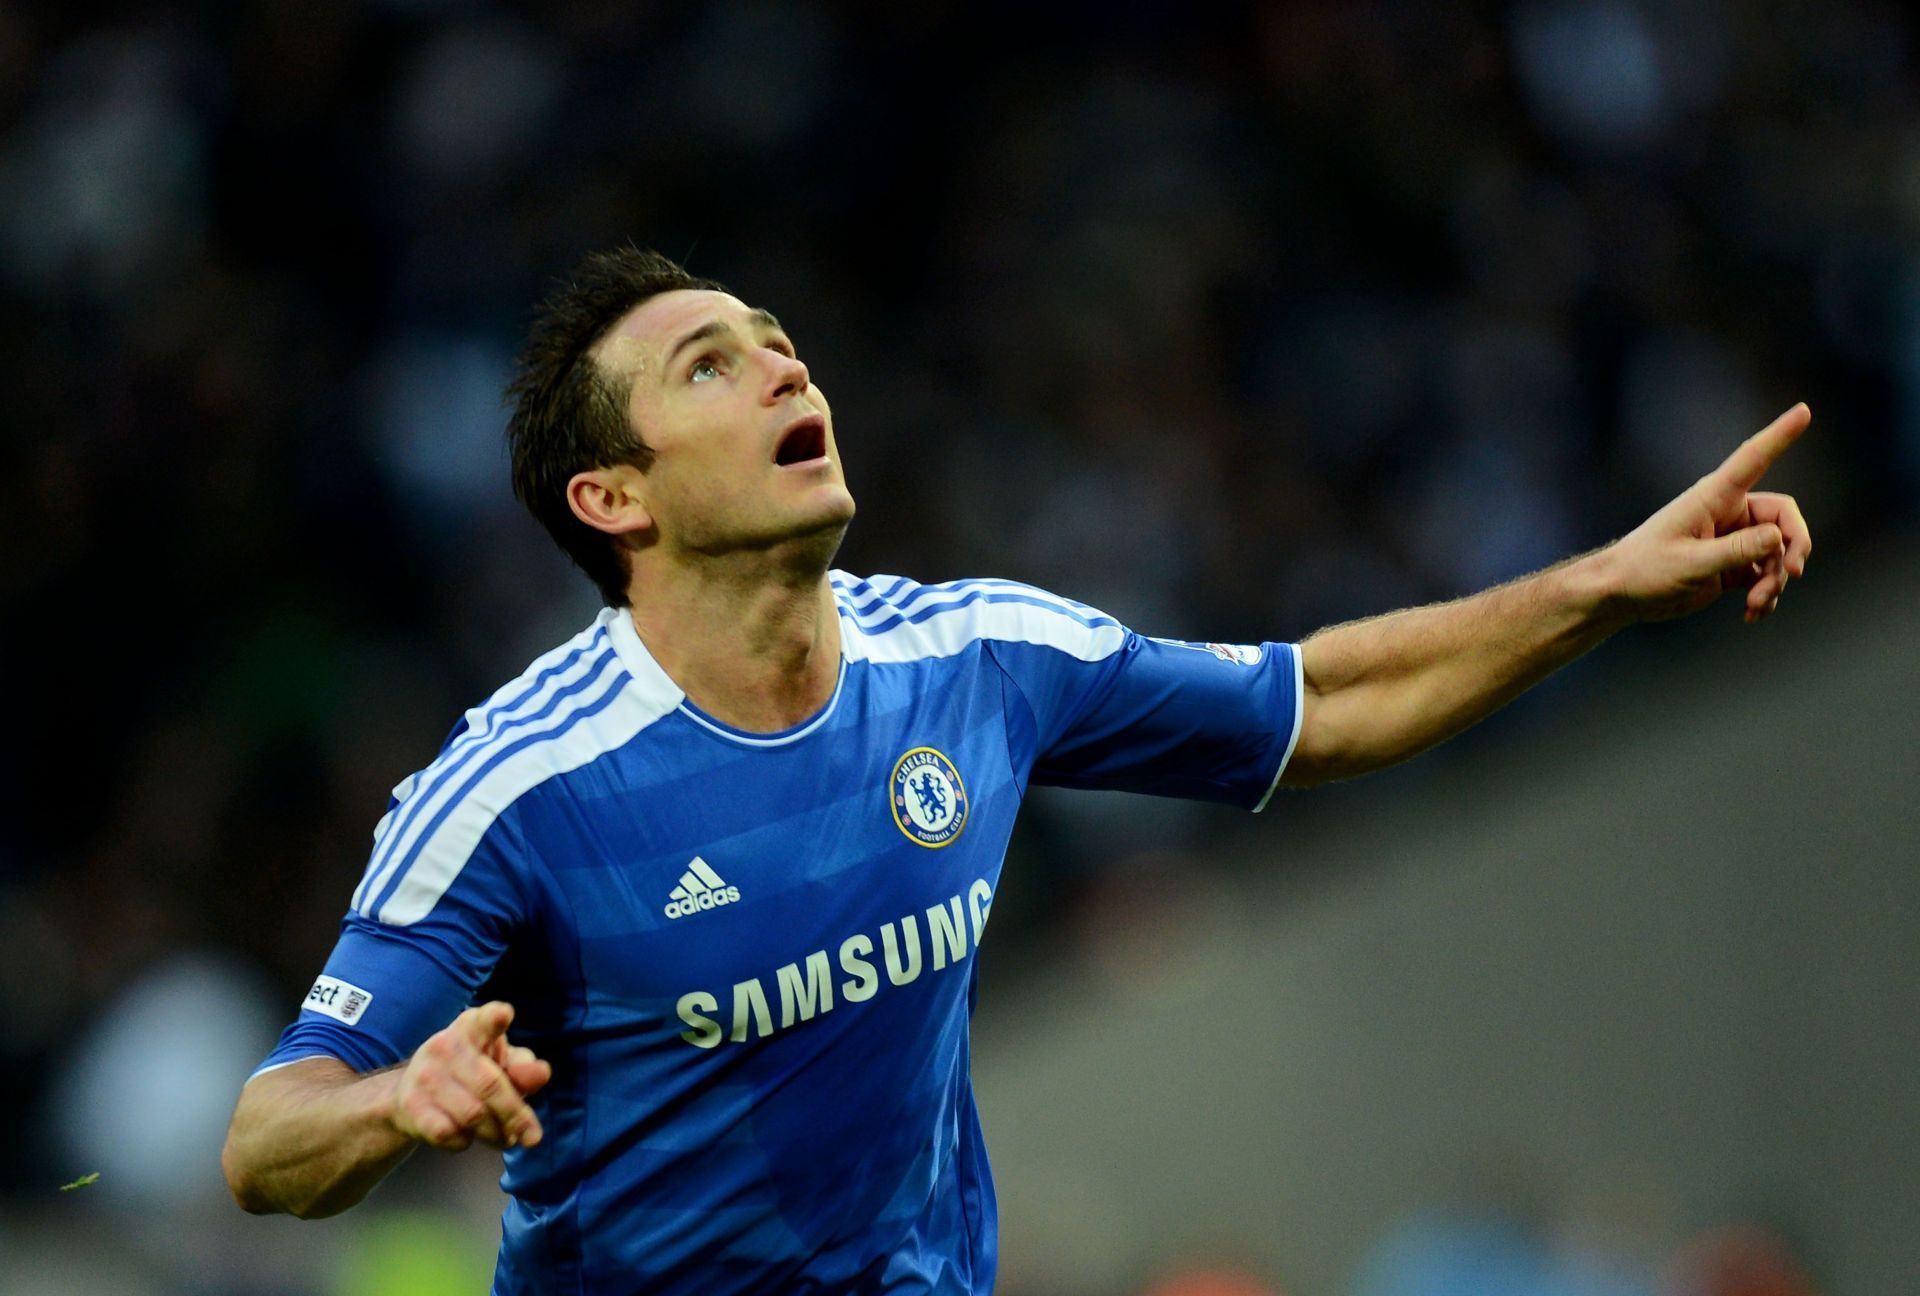 Frank Lampard celebrates a goal for Chelsea.